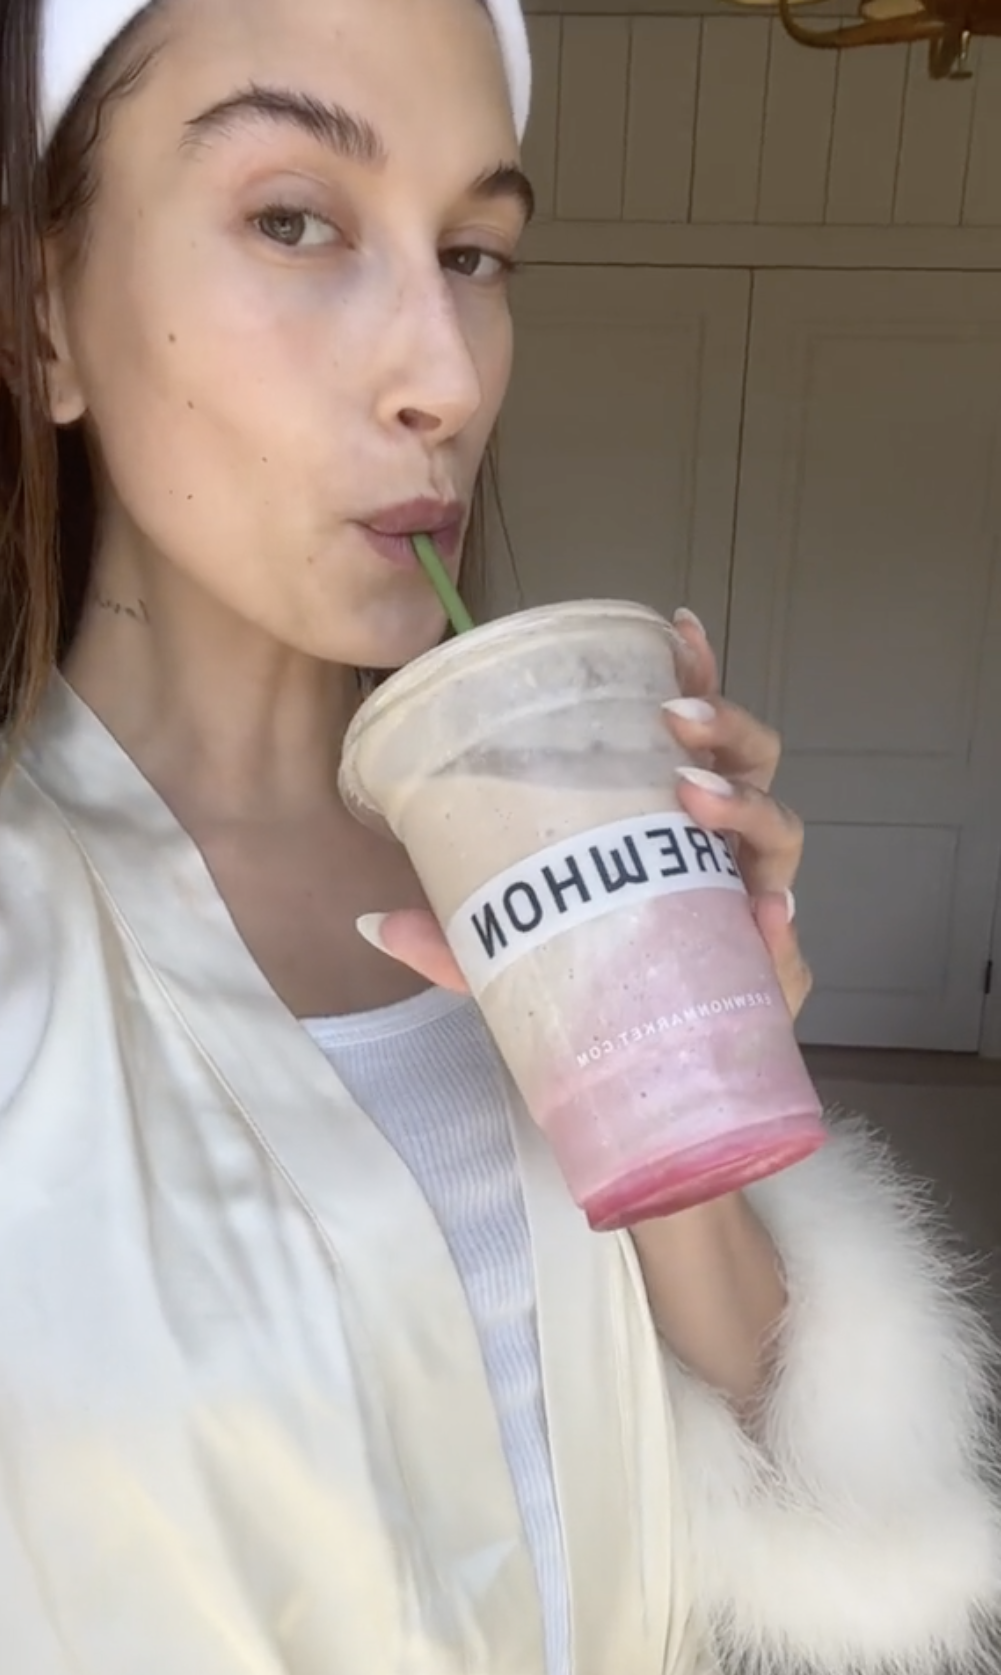 Hailey Bieber is sipping her Erewhon smoothie